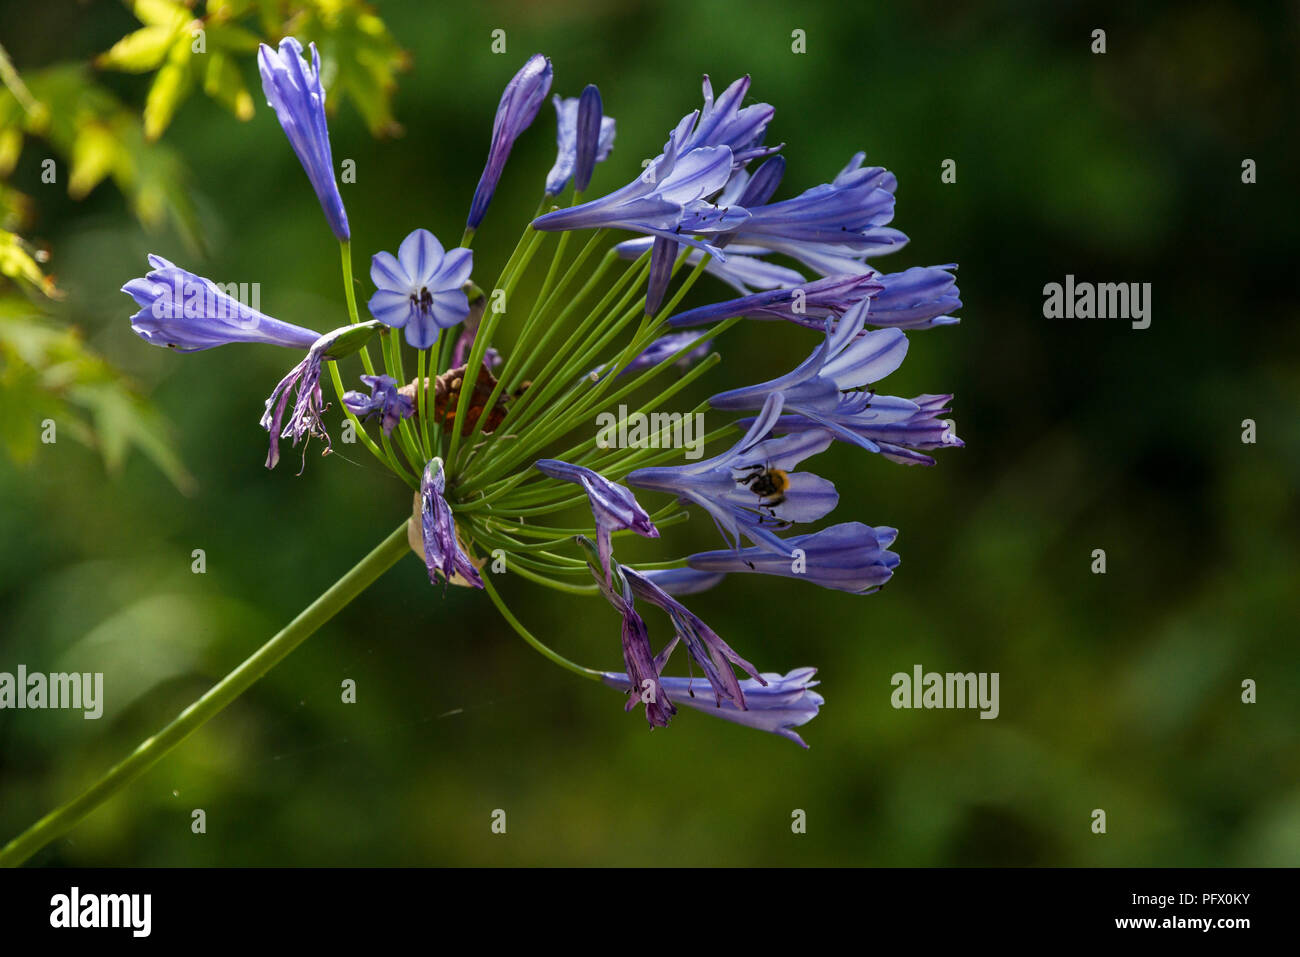 A bee on an African lily (Agapanthus) Stock Photo